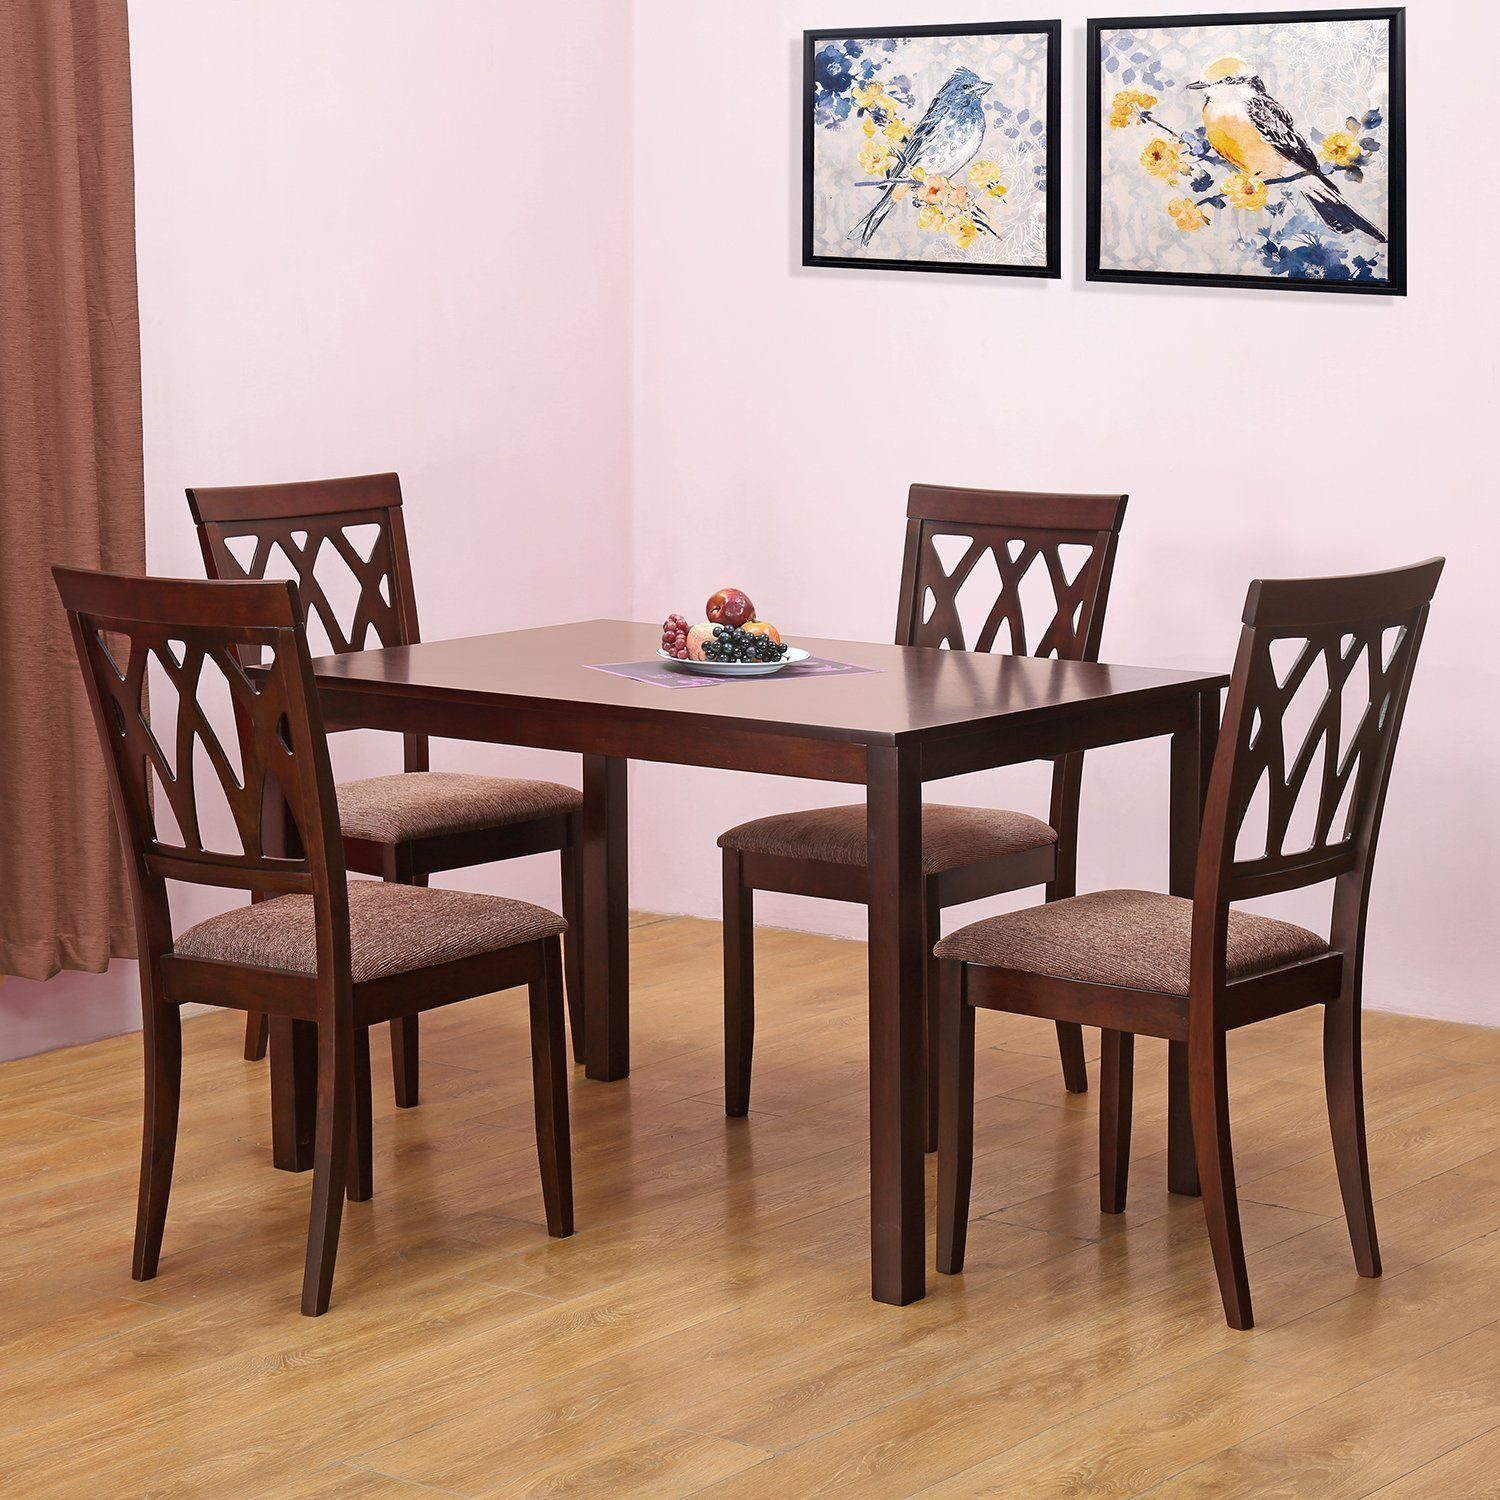 Home Nilkamal Peak Four Seater Dining Table Set Beige within measurements 1500 X 1500